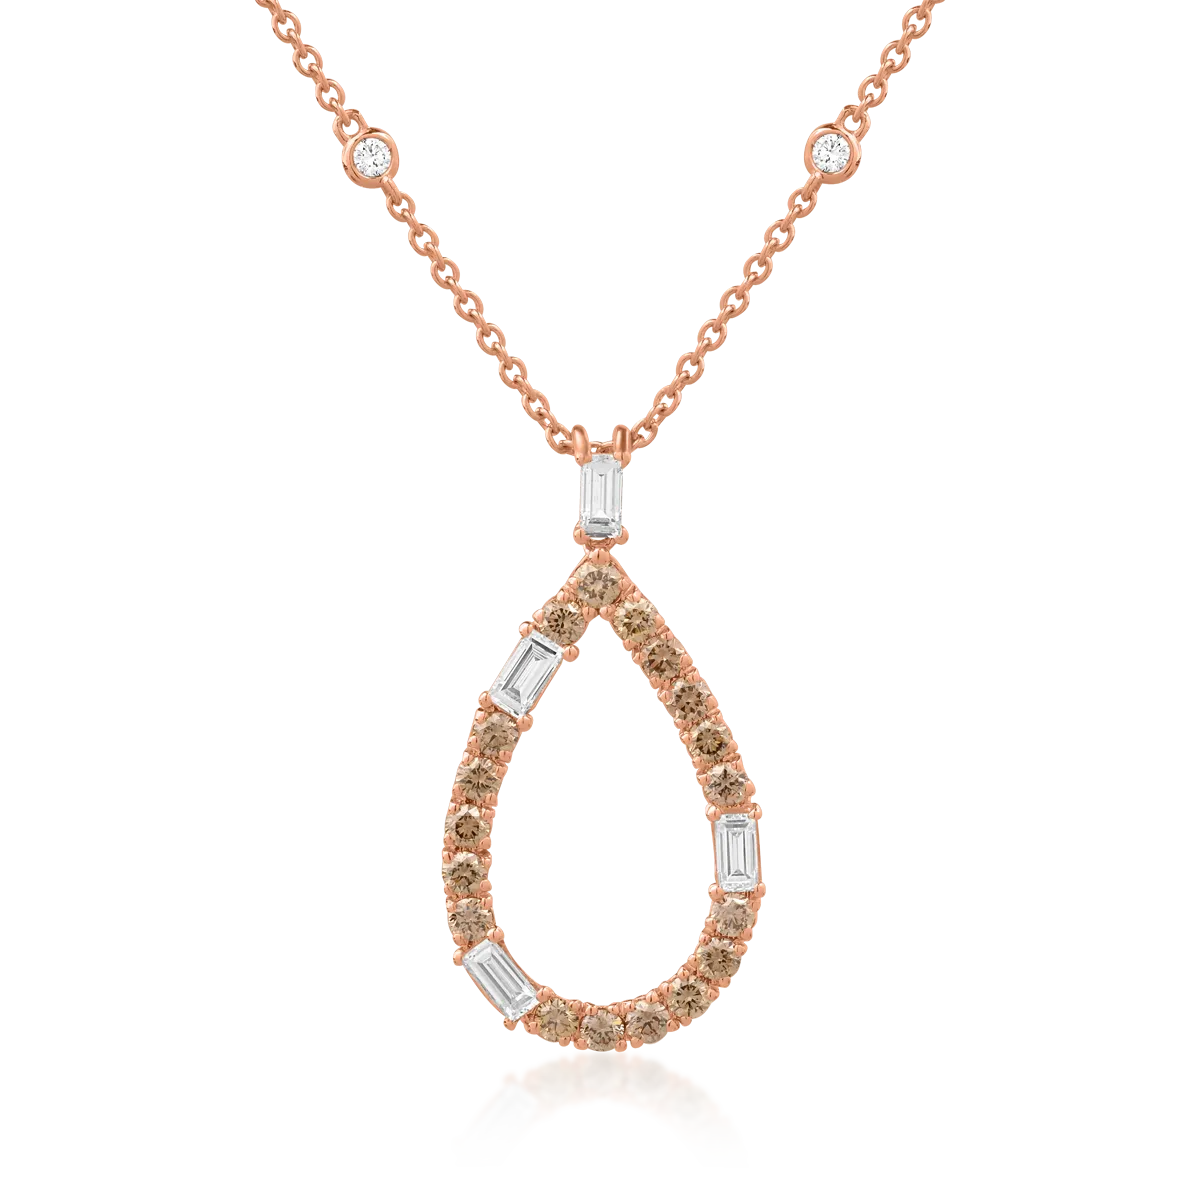 18K rose gold pendant necklace with 1.41ct diamonds